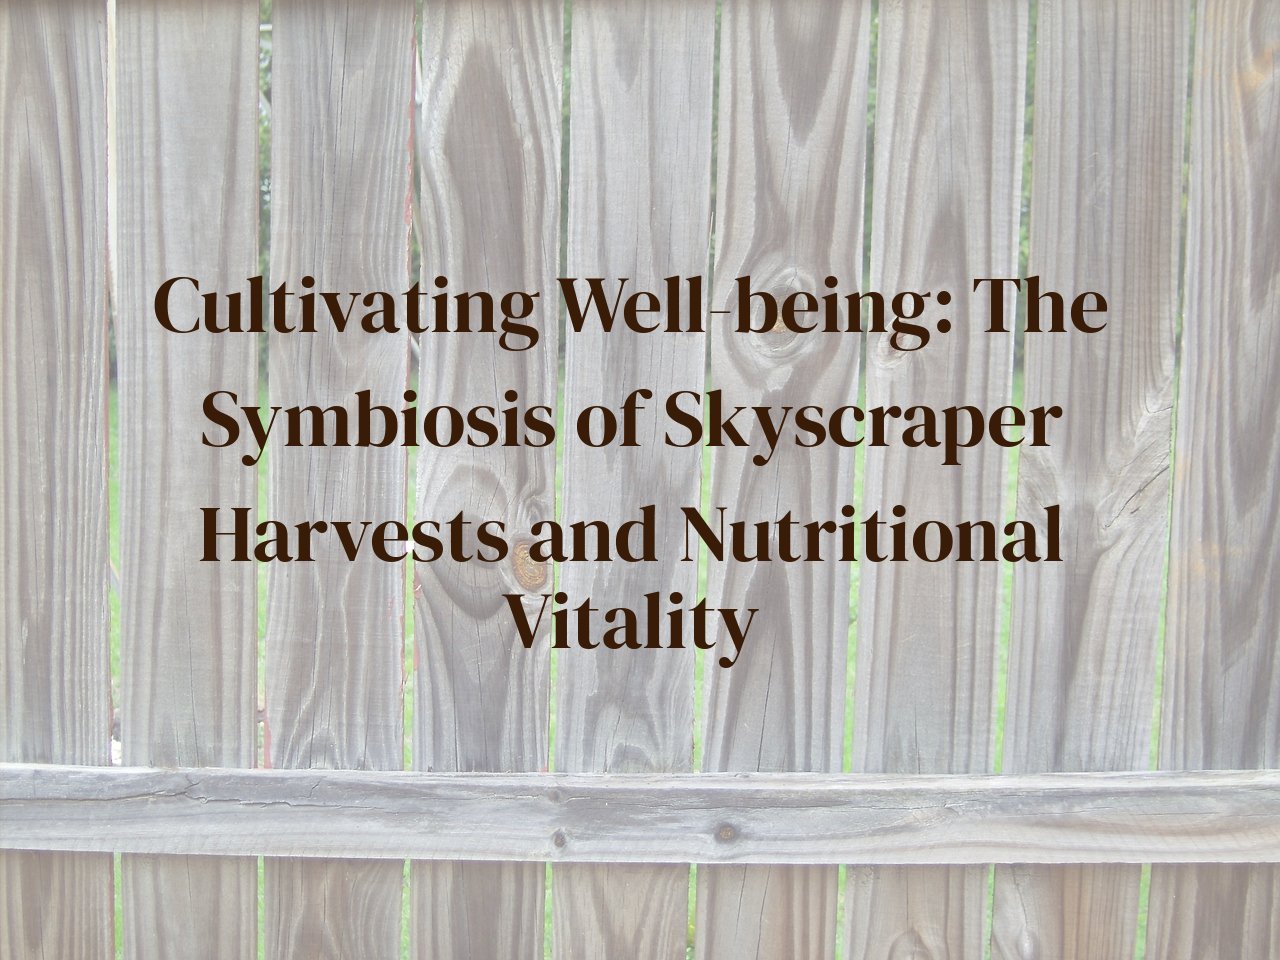 Cultivating Well-being: The Symbiosis of Skyscraper Harvests and Nutritional Vitality